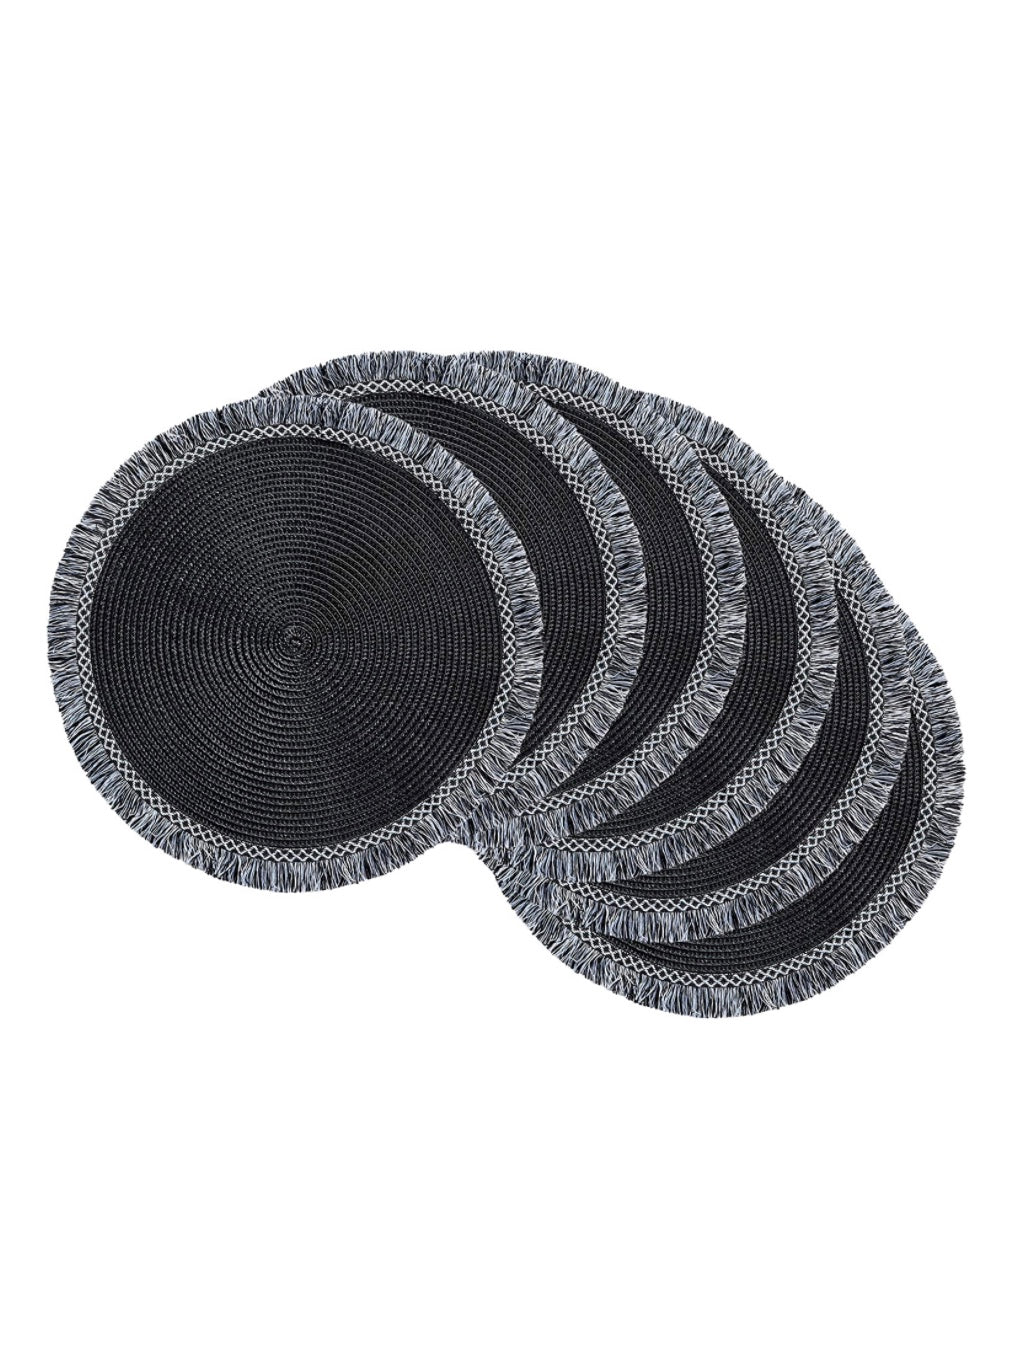 Set of 6 black round placemats